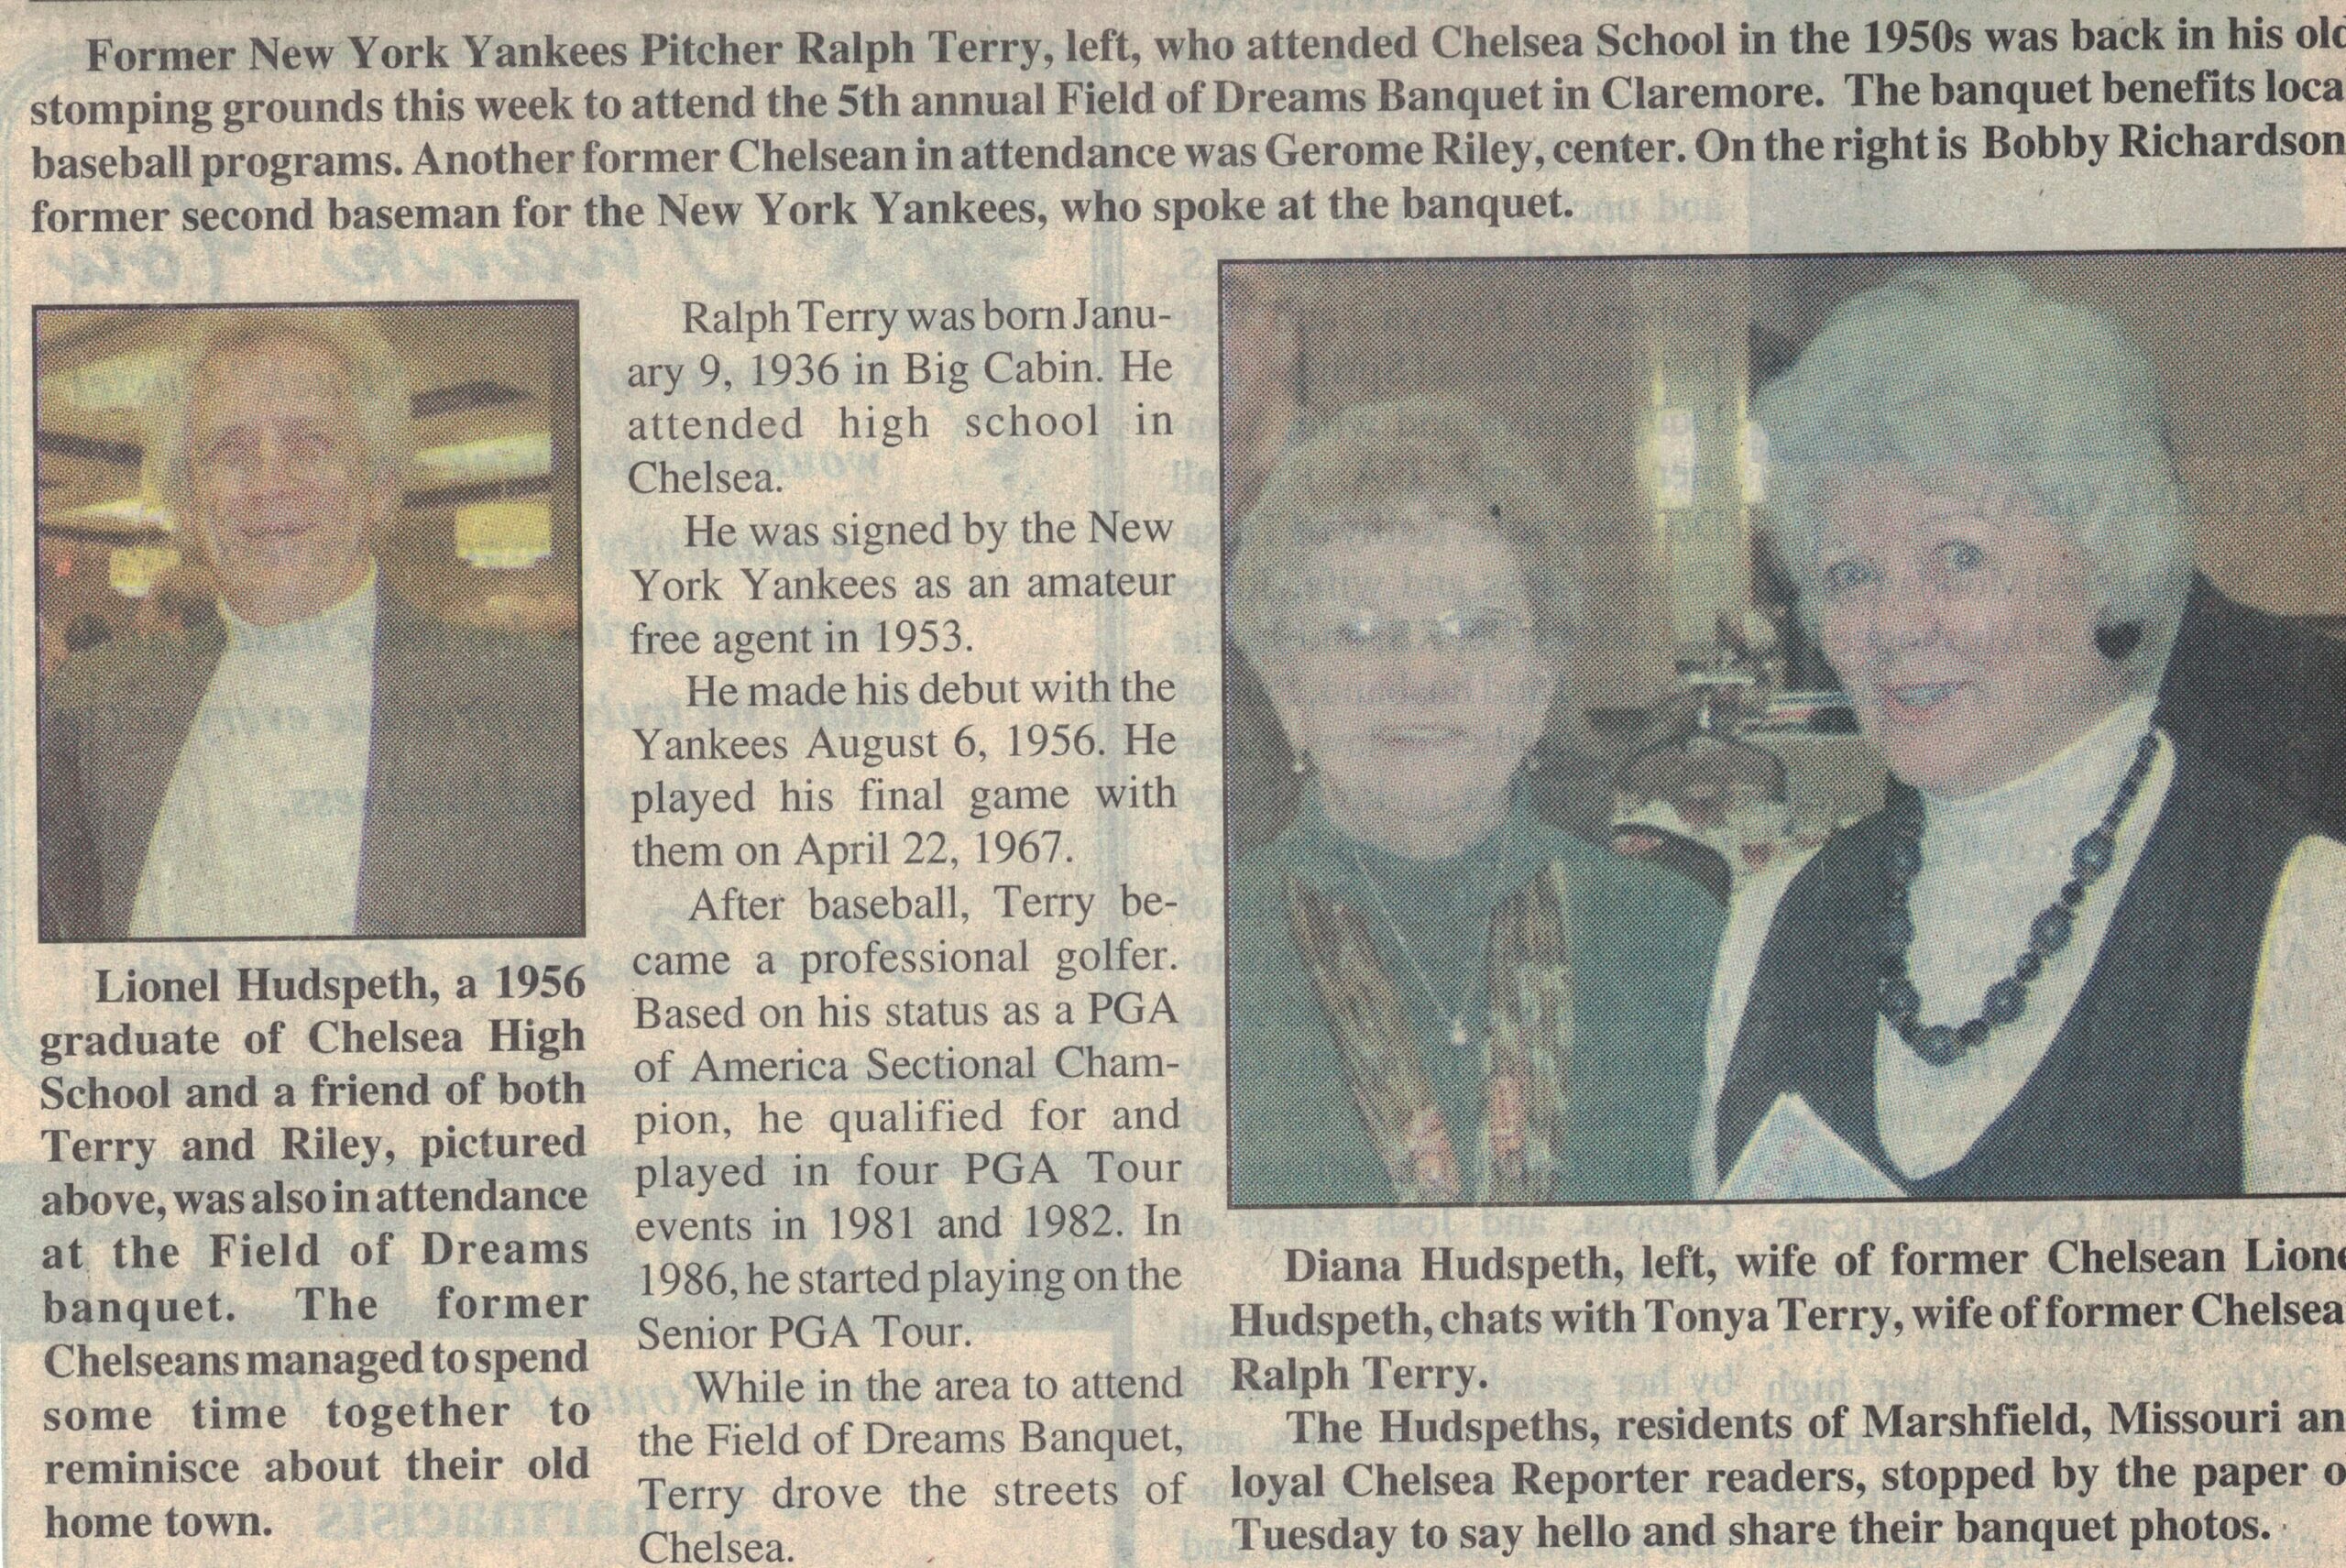 Article excerpt framed by picture of man on left and two women on right